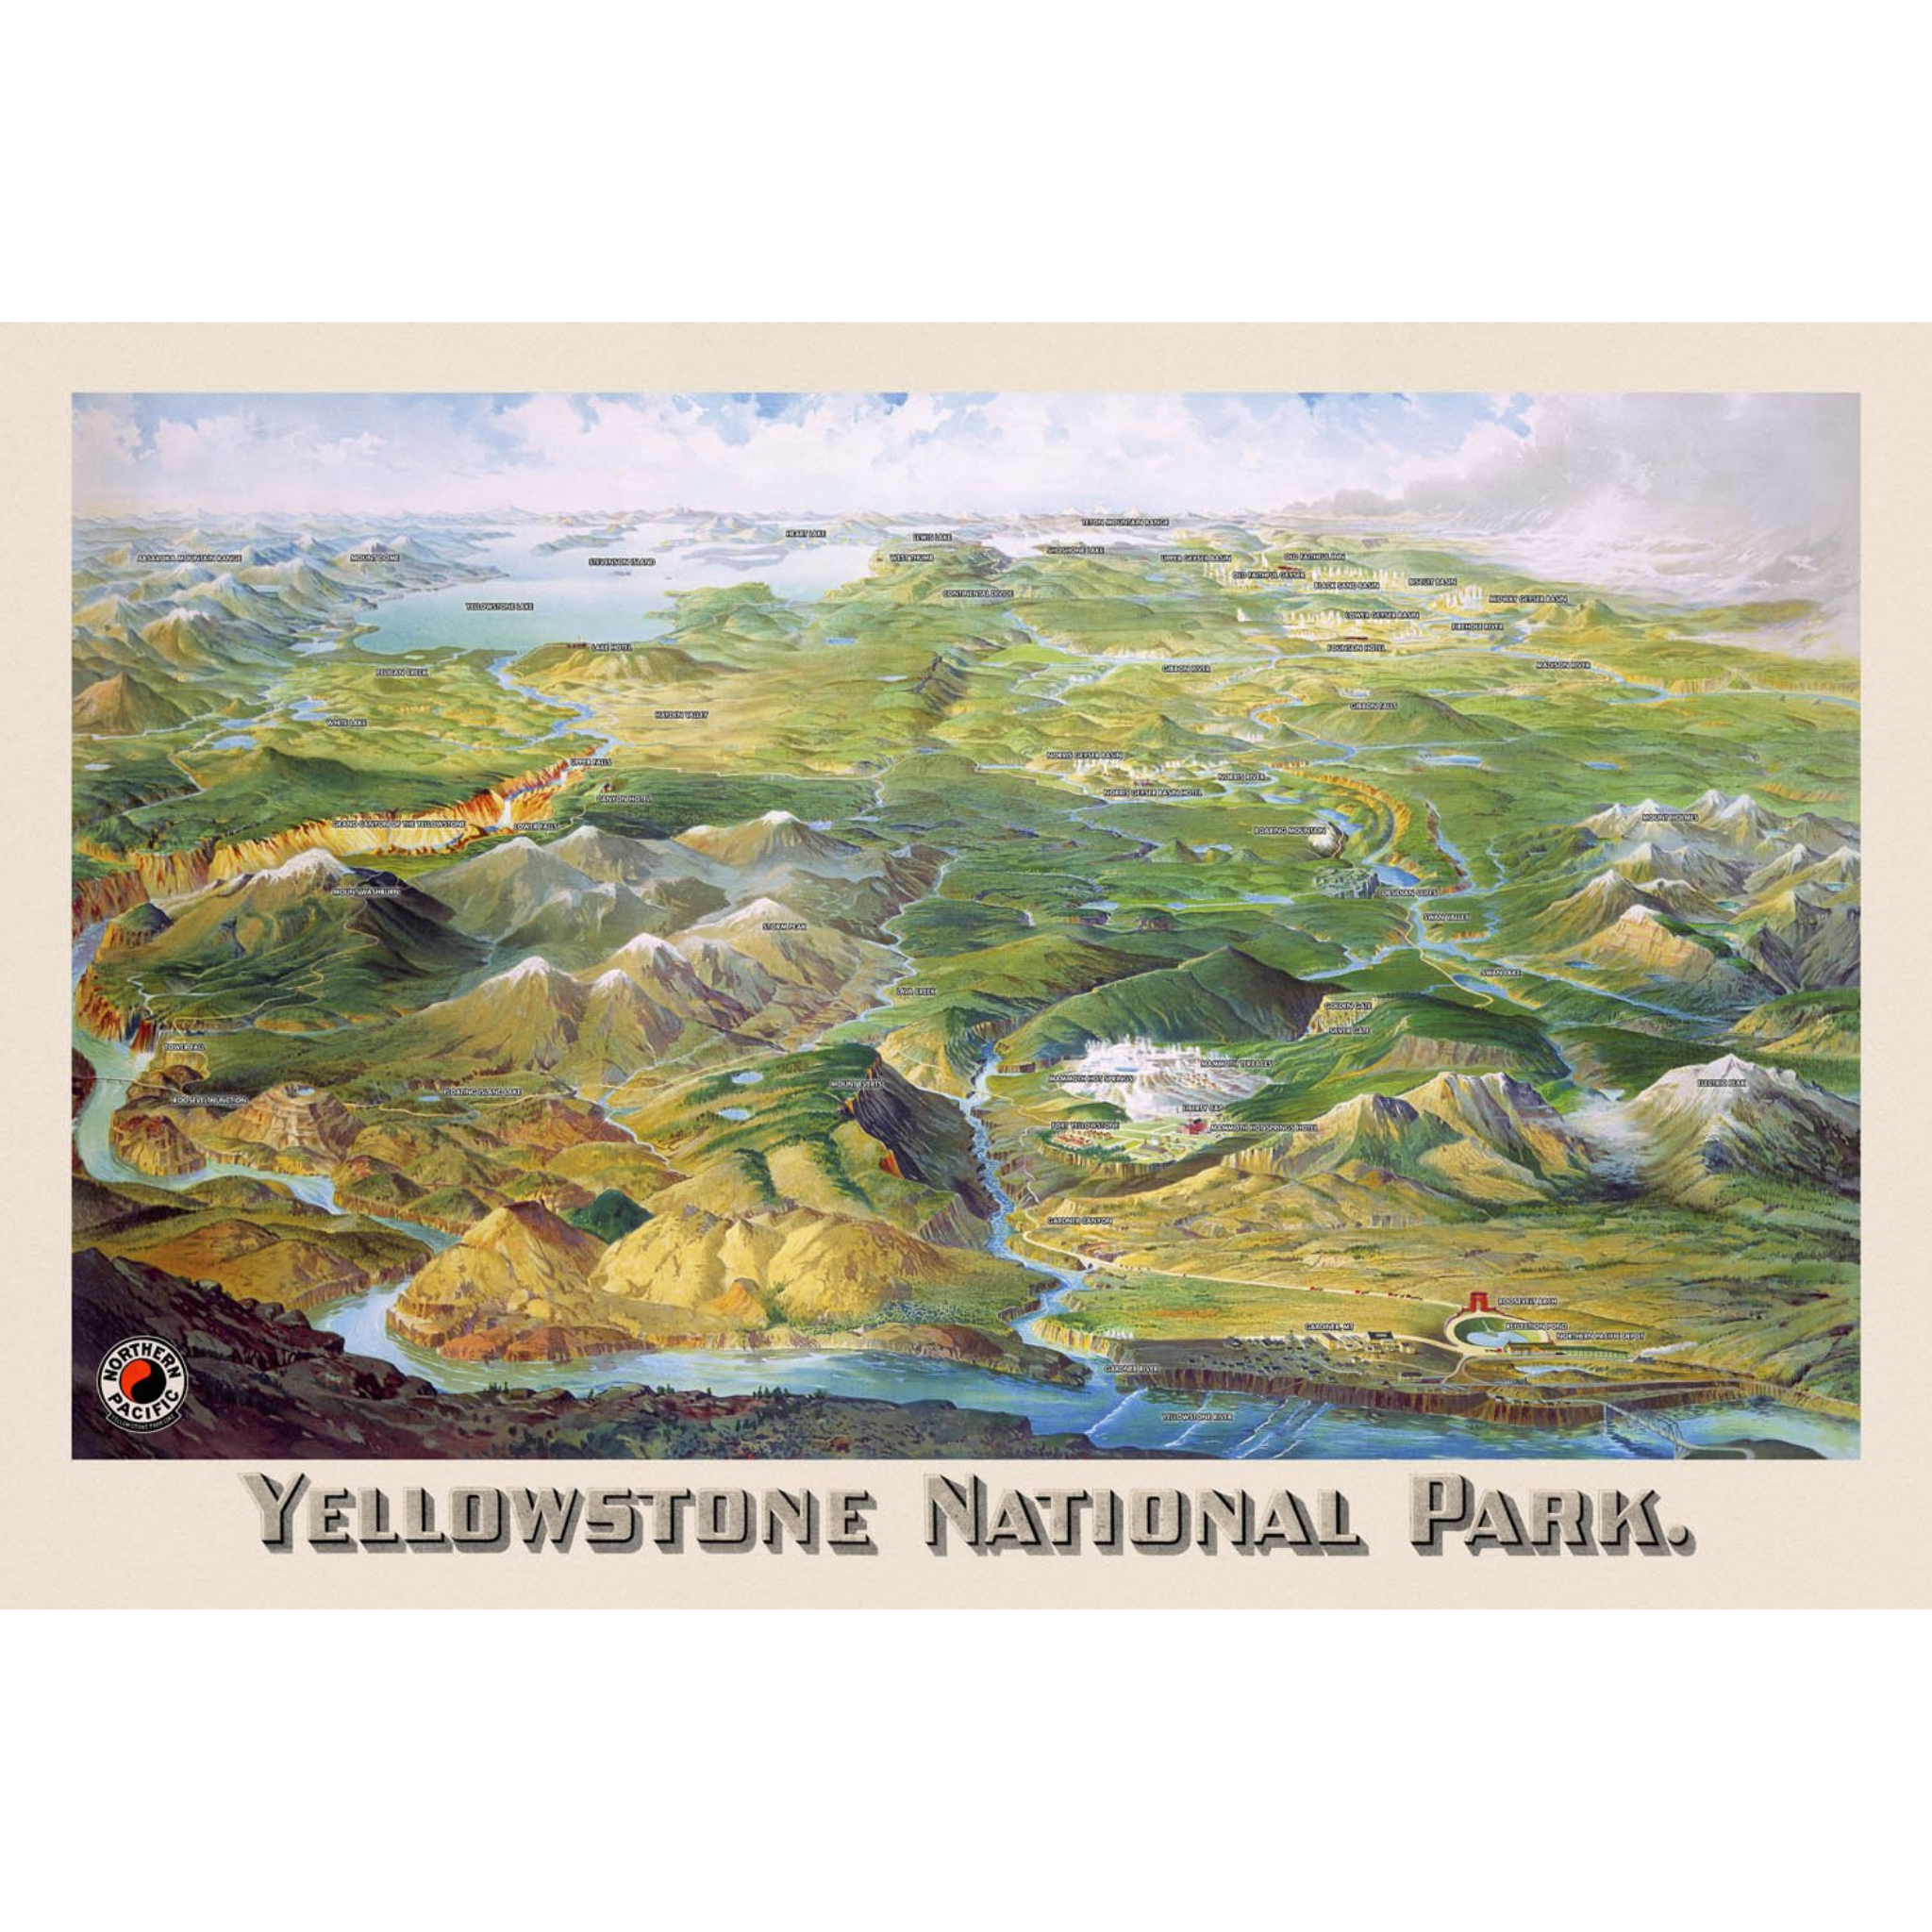 Birds-Eye View of Yellowstone National Park - 1904 Henry Wellge Chromolithograph